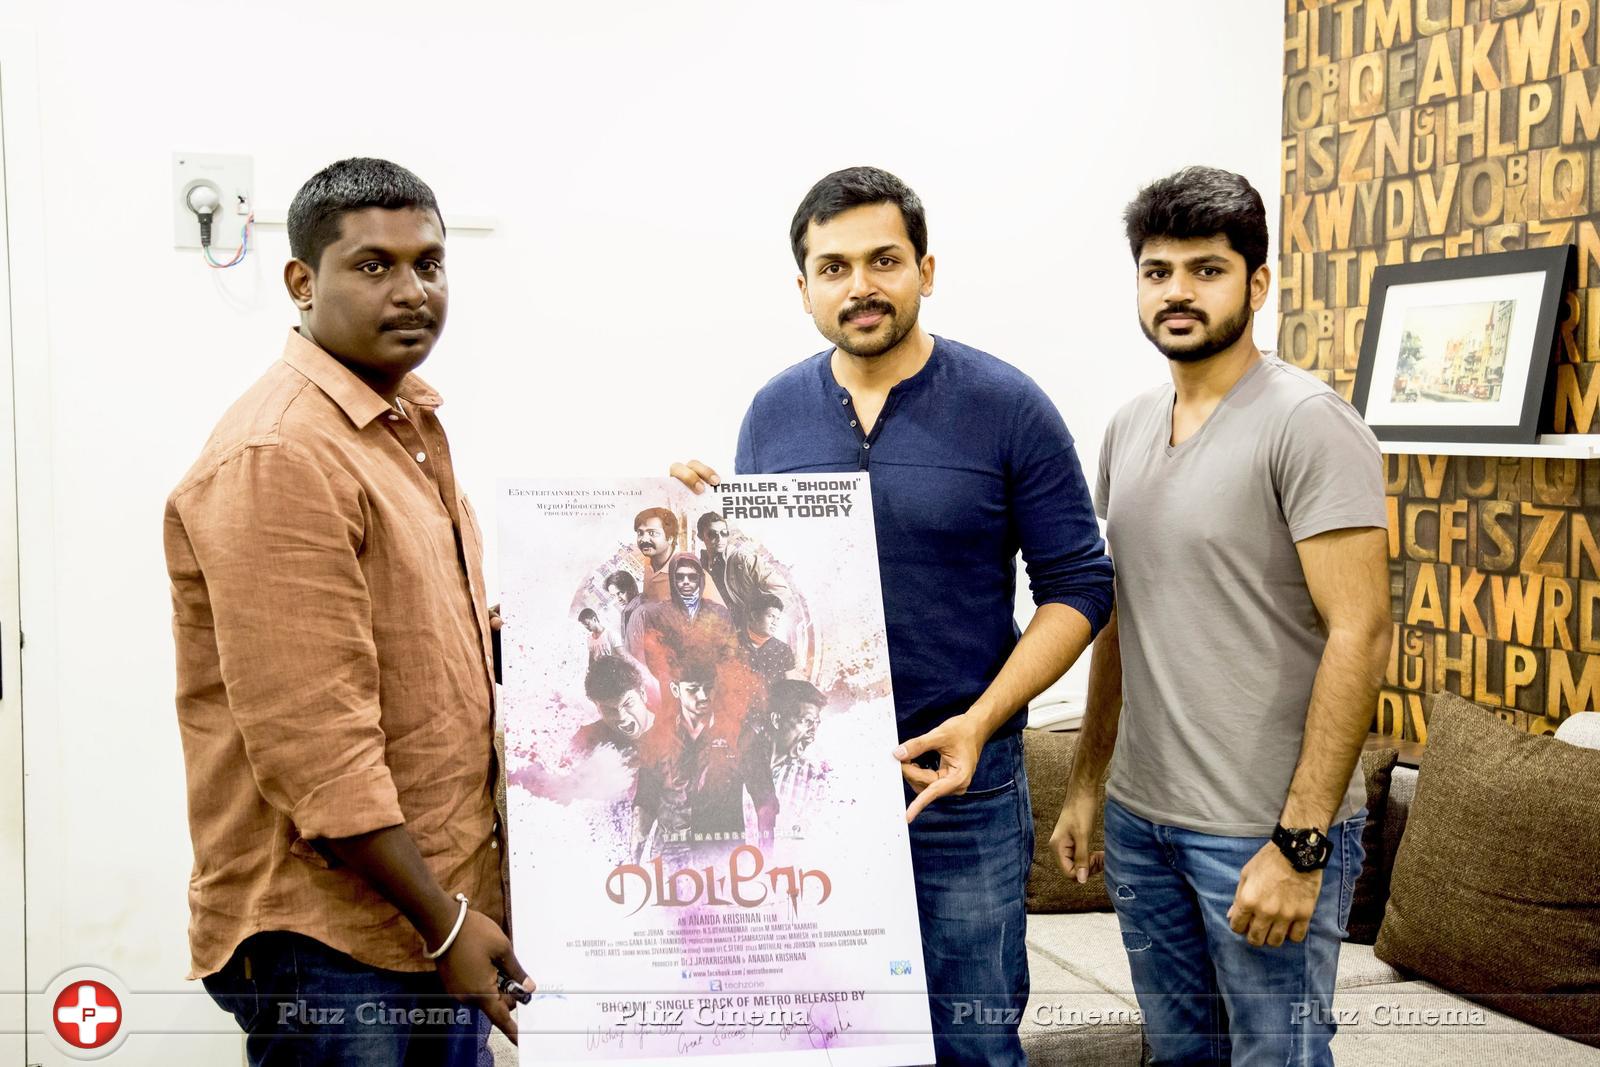 Karthi Launched Metro Movie Bhoomi Song Sung by Gana Bala Stills | Picture 1199113